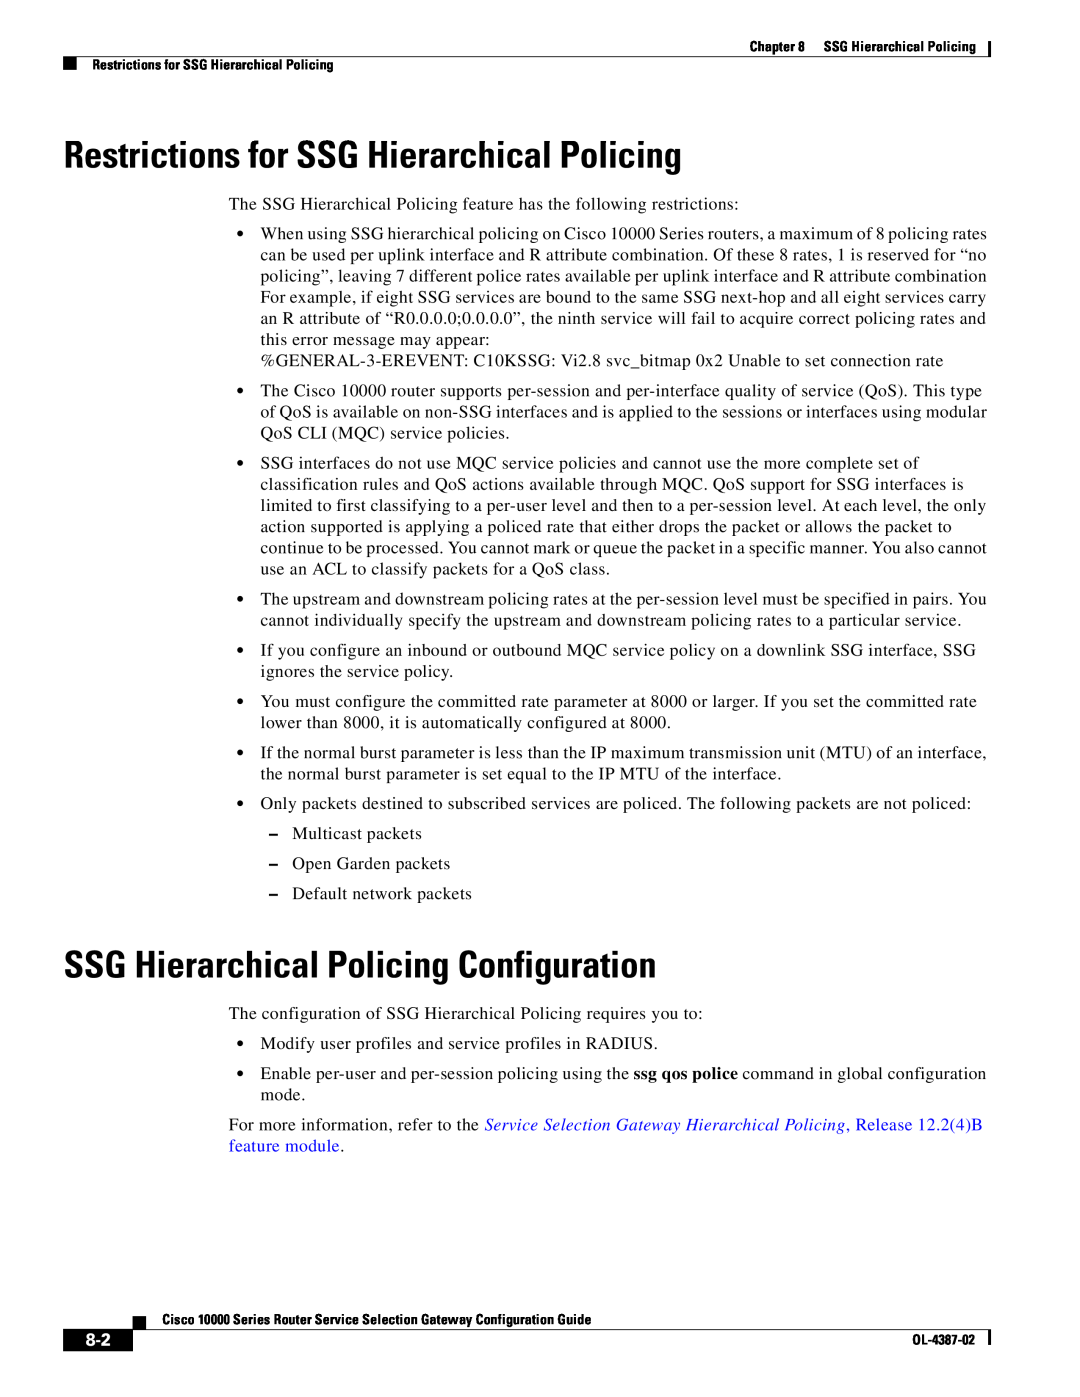 Cisco Systems OL-4387-02 manual Restrictions for SSG Hierarchical Policing, SSG Hierarchical Policing Configuration 